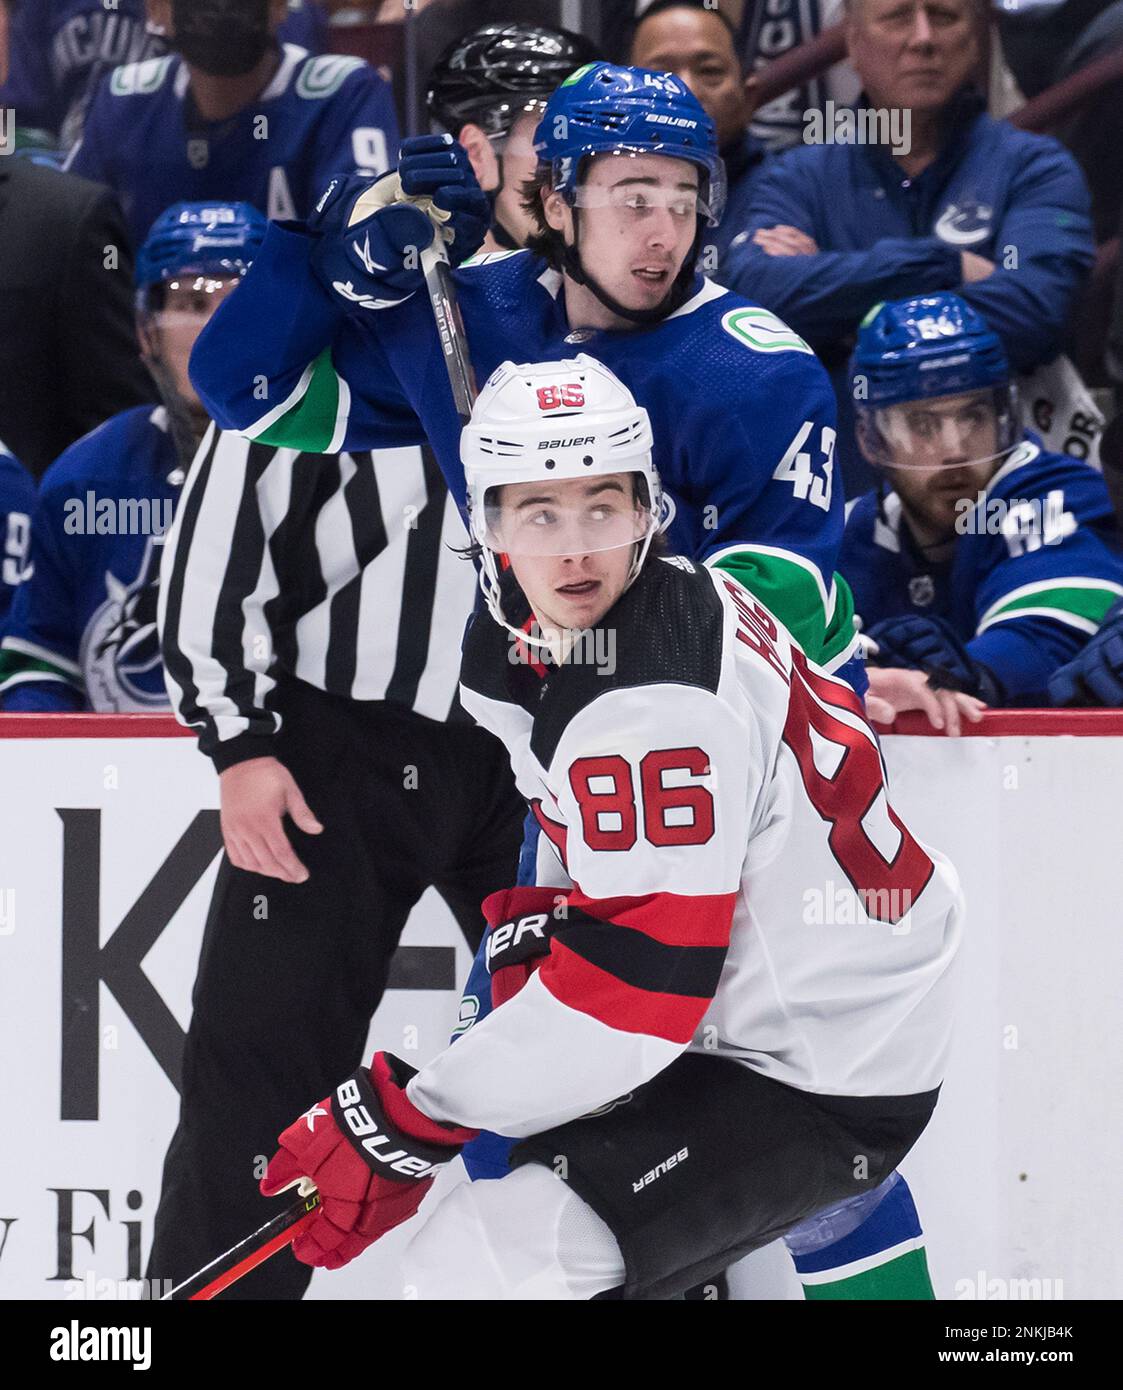 New Jersey Devils Jack Hughes, front, and his brother, Vancouver Canucks Quinn Hughes, watch a play during the second period of an NHL hockey game Tuesday, March 15, 2022, in Vancouver, British